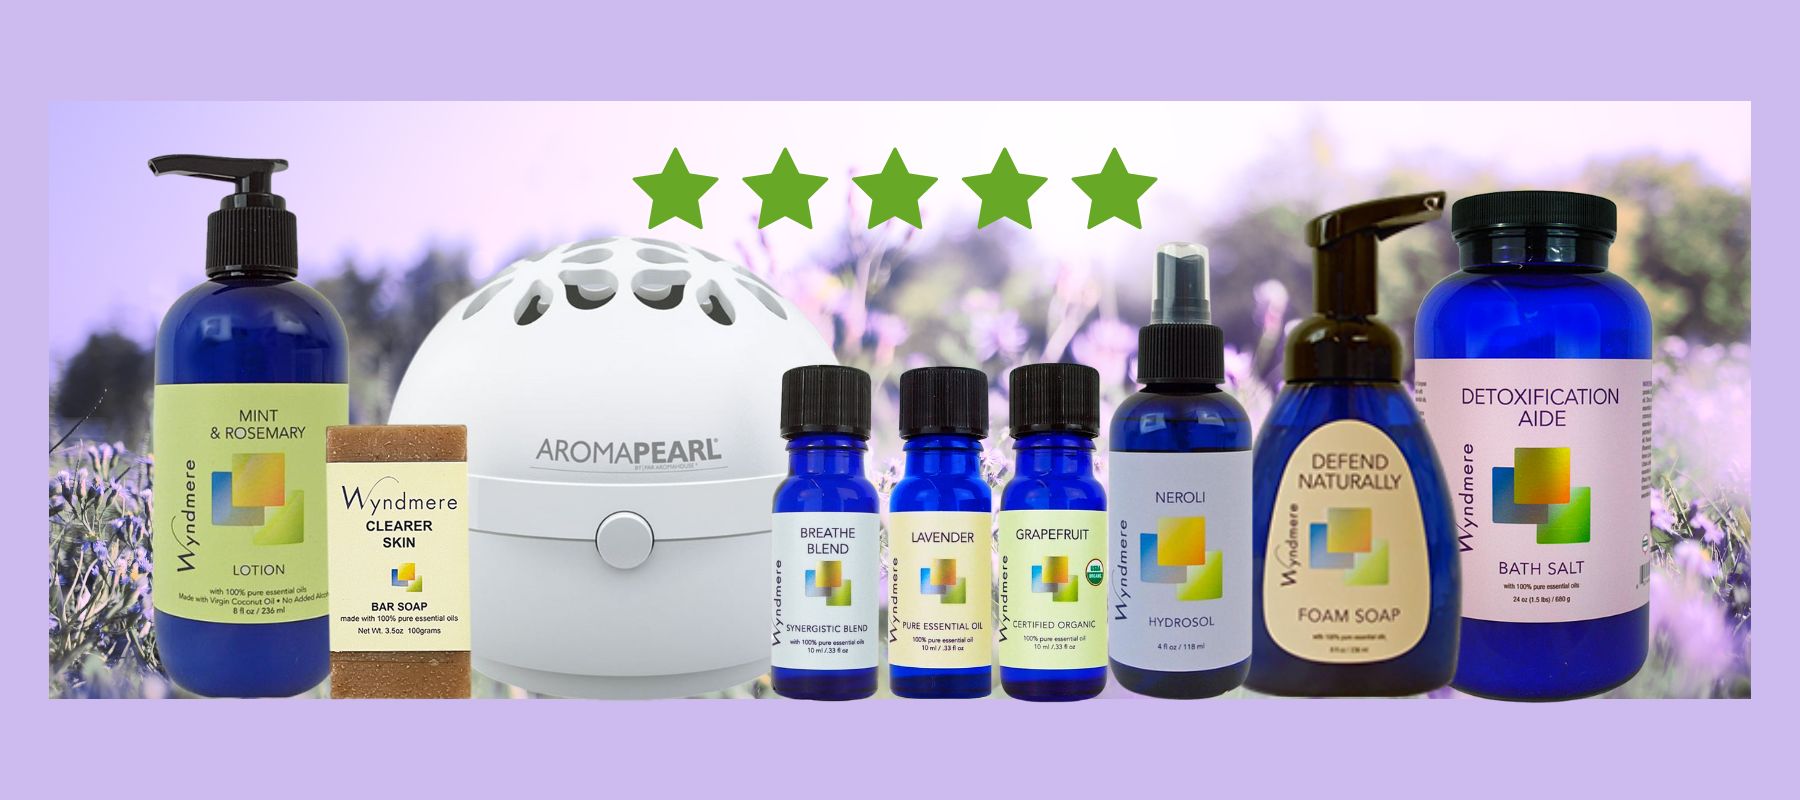 Wyndmere - Best Sellers images of Breathe Blend, AromaPearl and Aches & Pains Cream